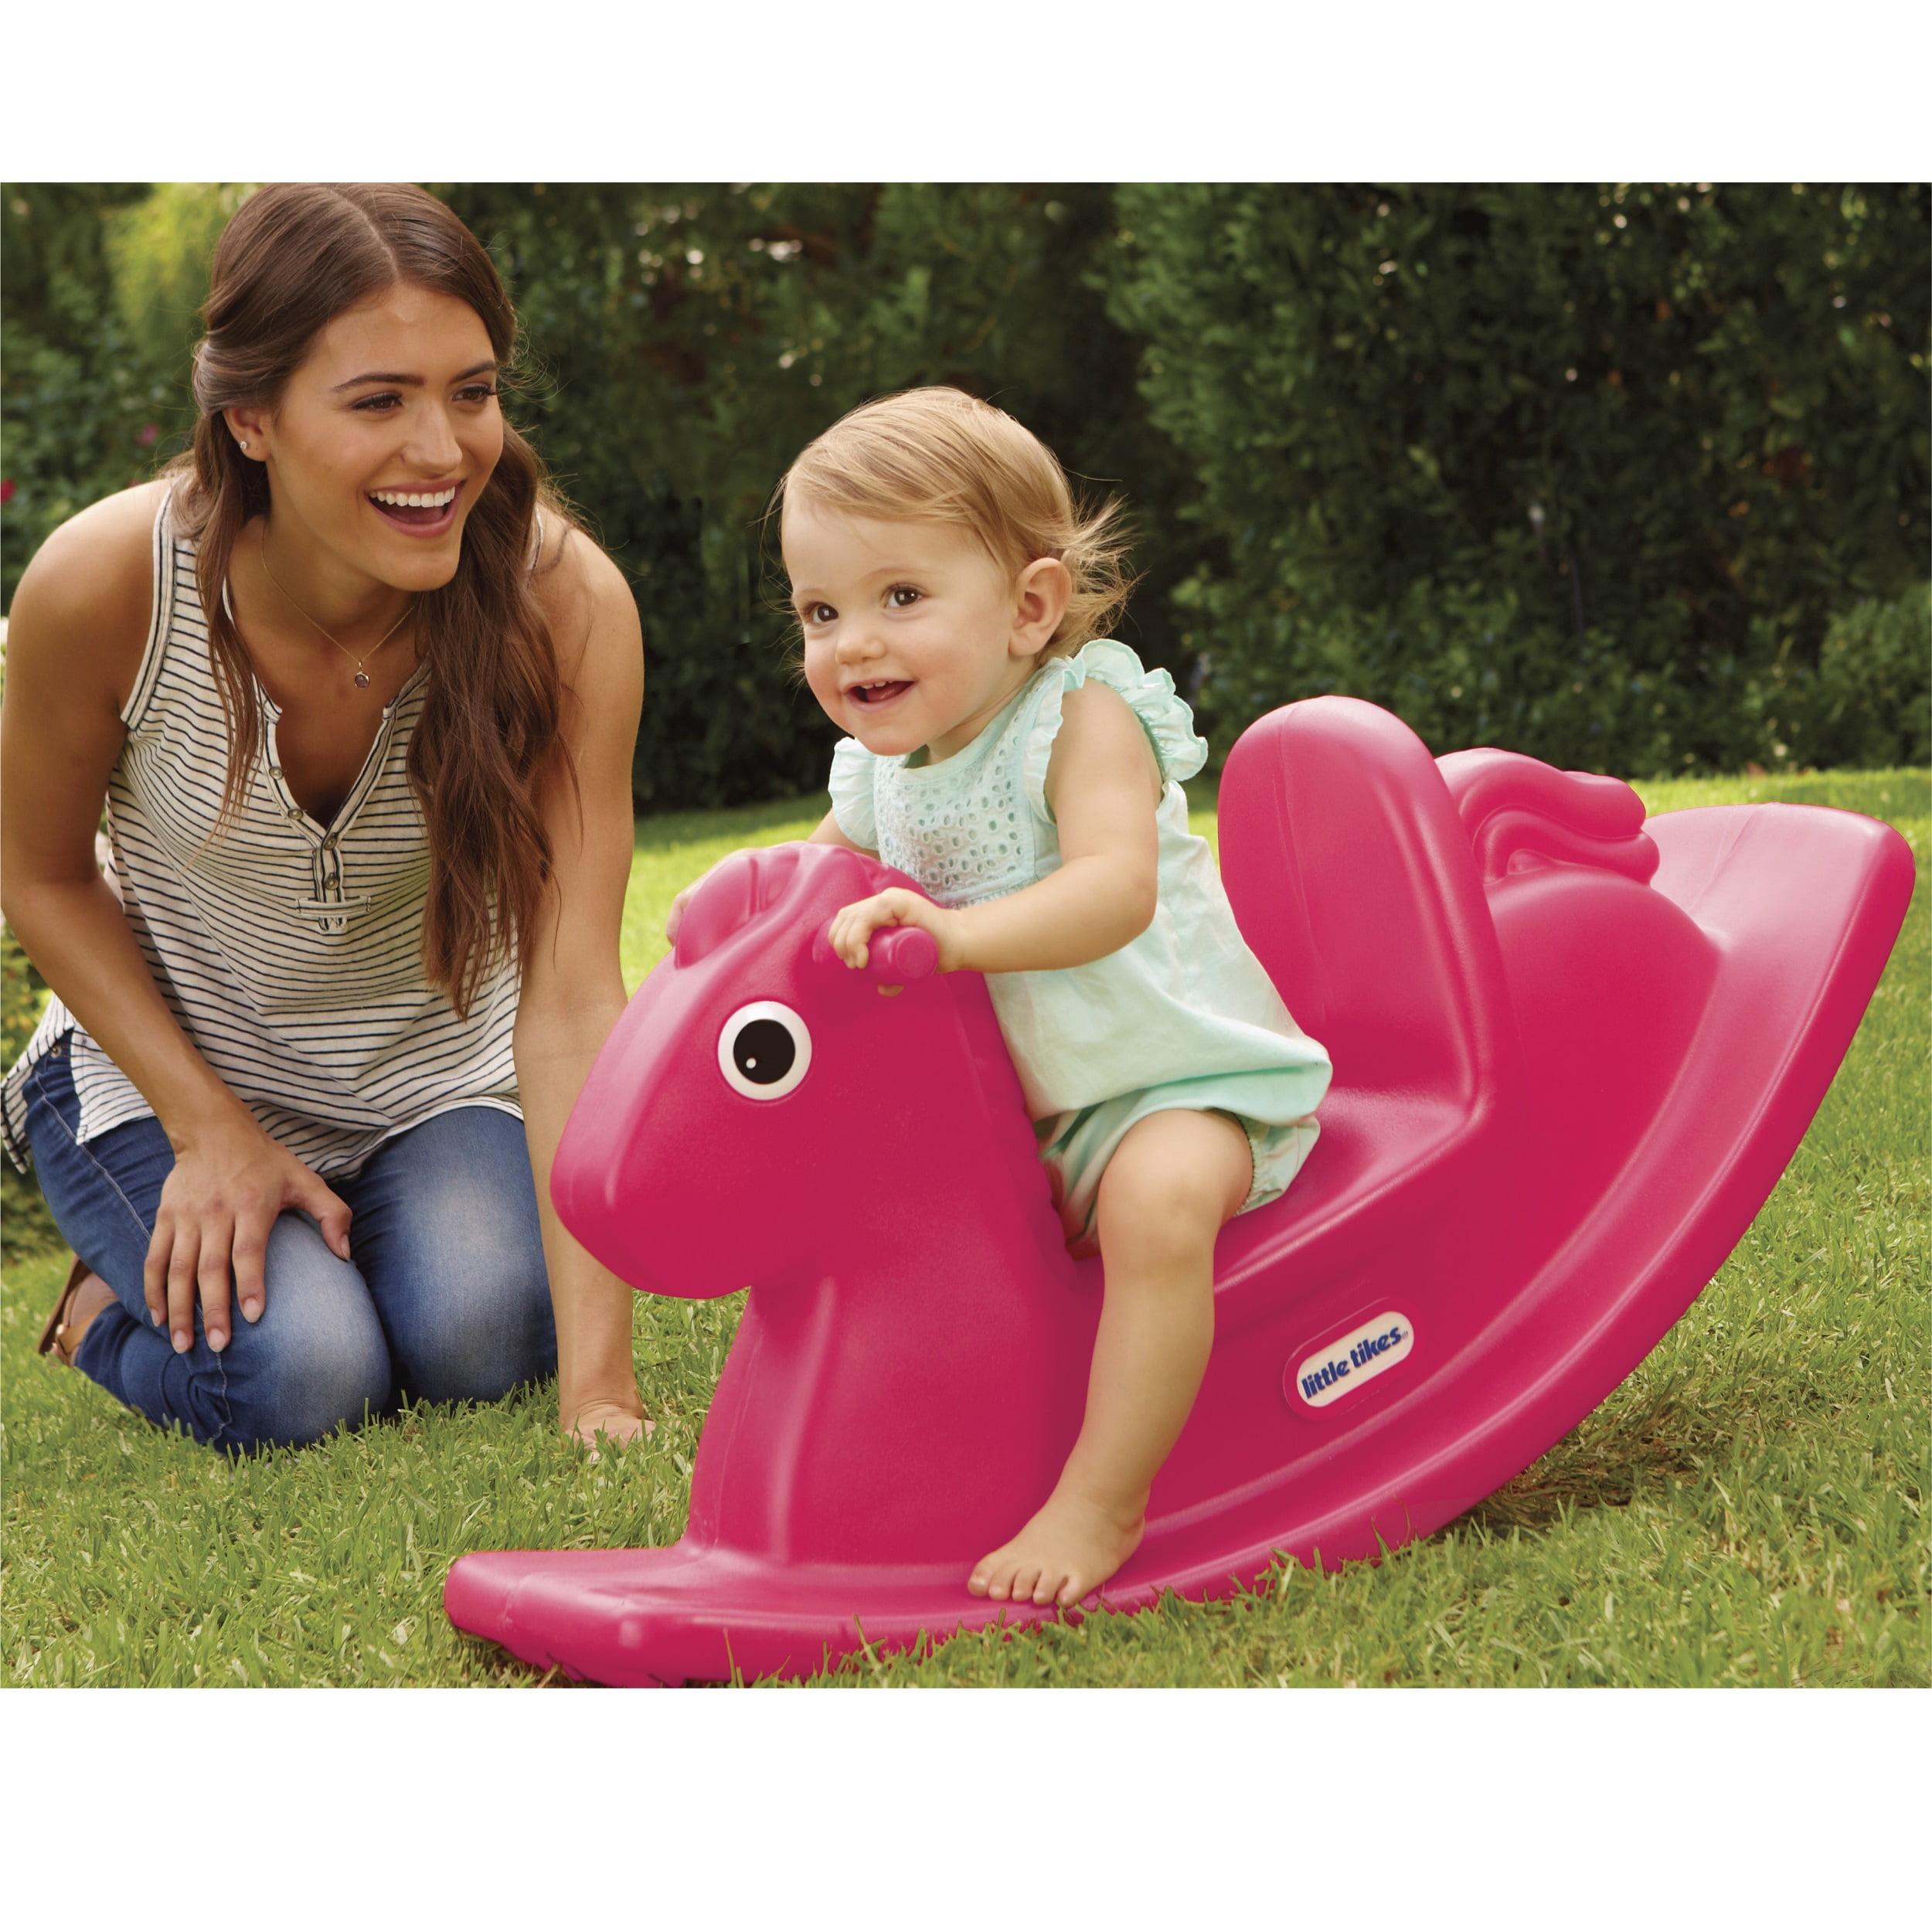 Little Tikes Kids Rocking Horse in Magenta, Classic Indoor Outdoor Toddler Ride-on Toy - For Kids Boys Girls Ages 12 Months to 3 Years Old - 2